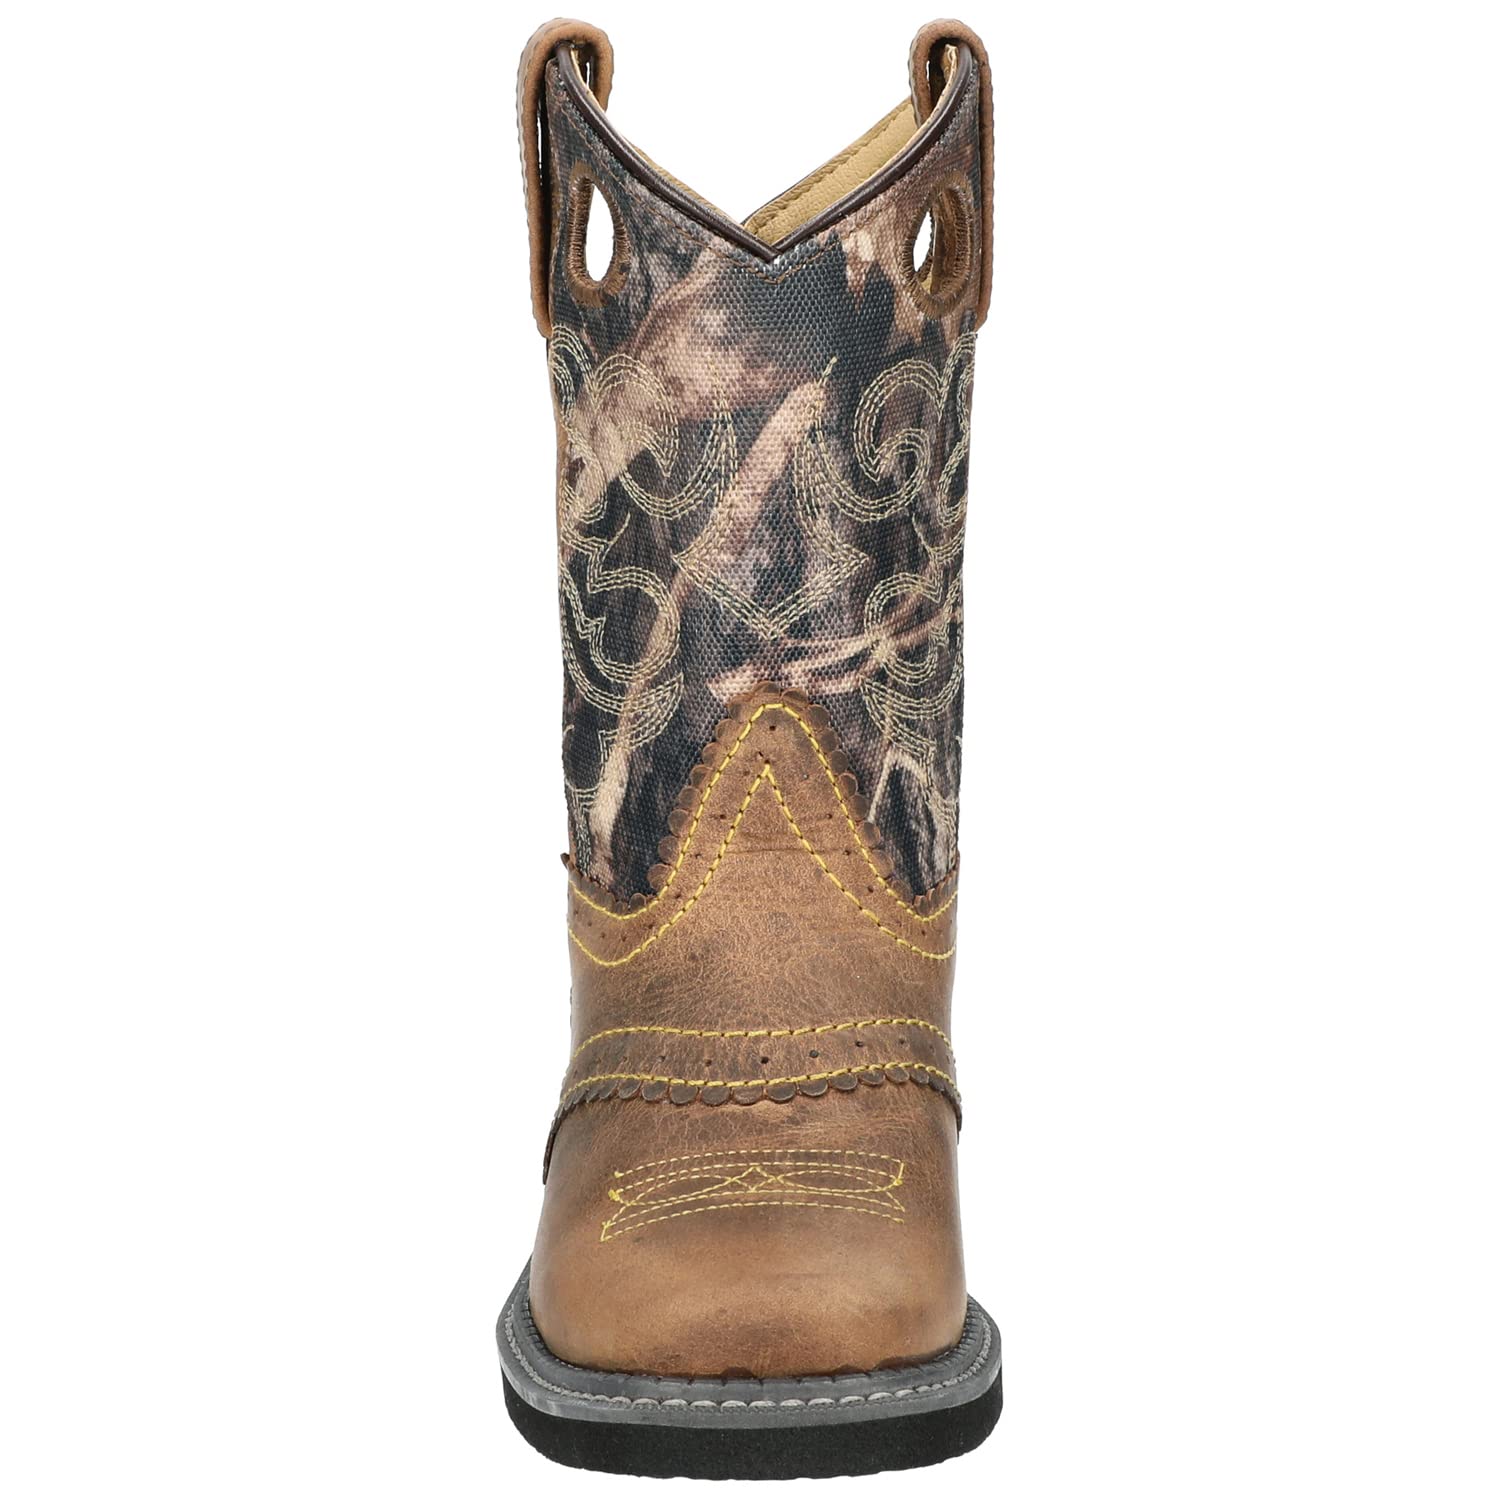 Smoky Mountain Boots | Pawnee Series | Youth Western Boot | Square Toe | Genuine Leather | Crepe Sole & Walking Heel | Leather Upper & Man-Made Lining | True Timber Camo Shaft